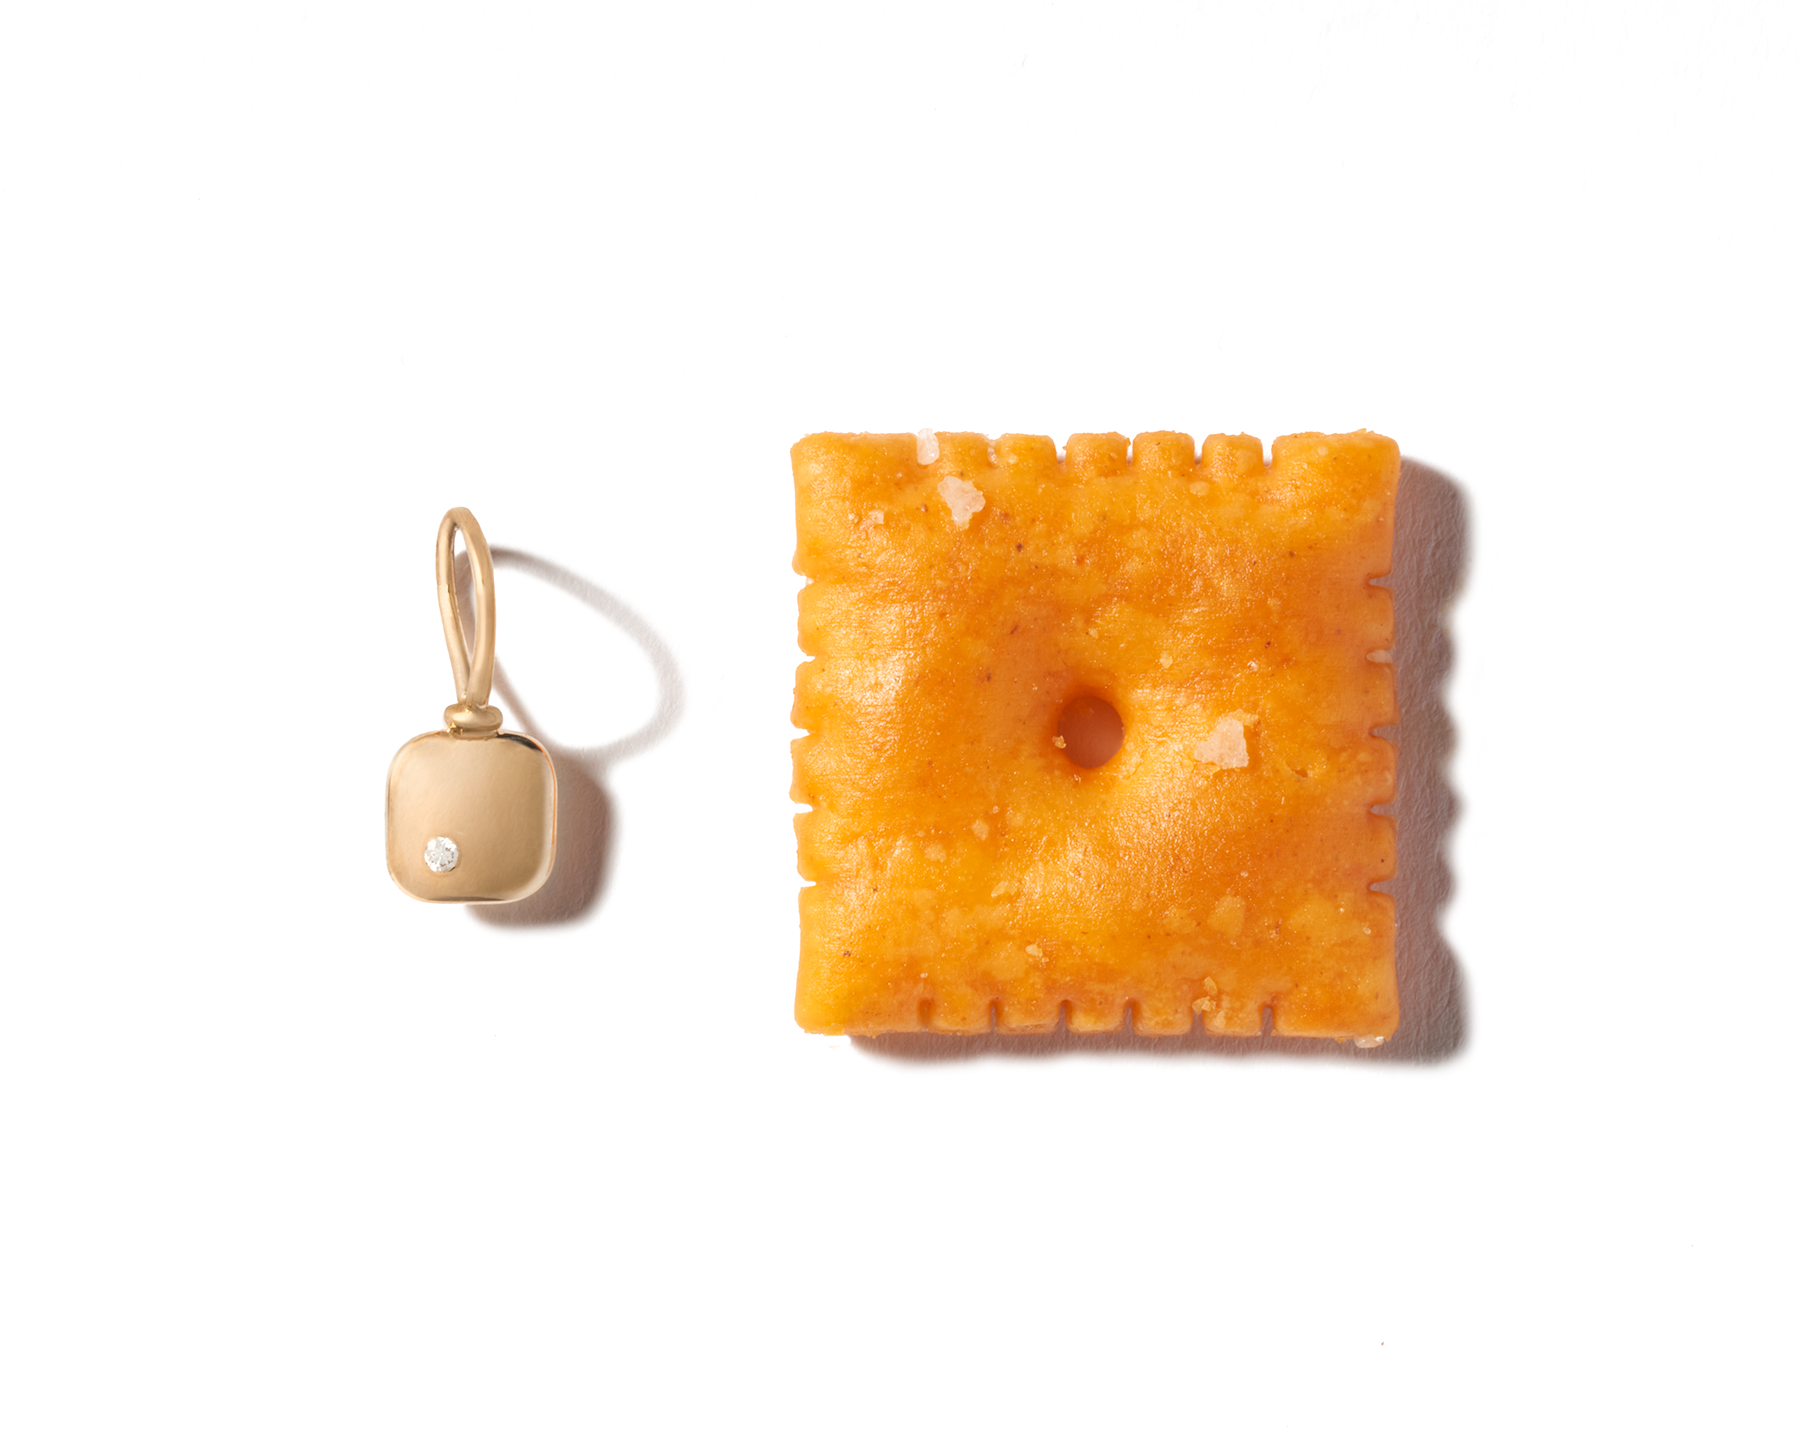 Square tiny gold necklace charm next to Cheez-It